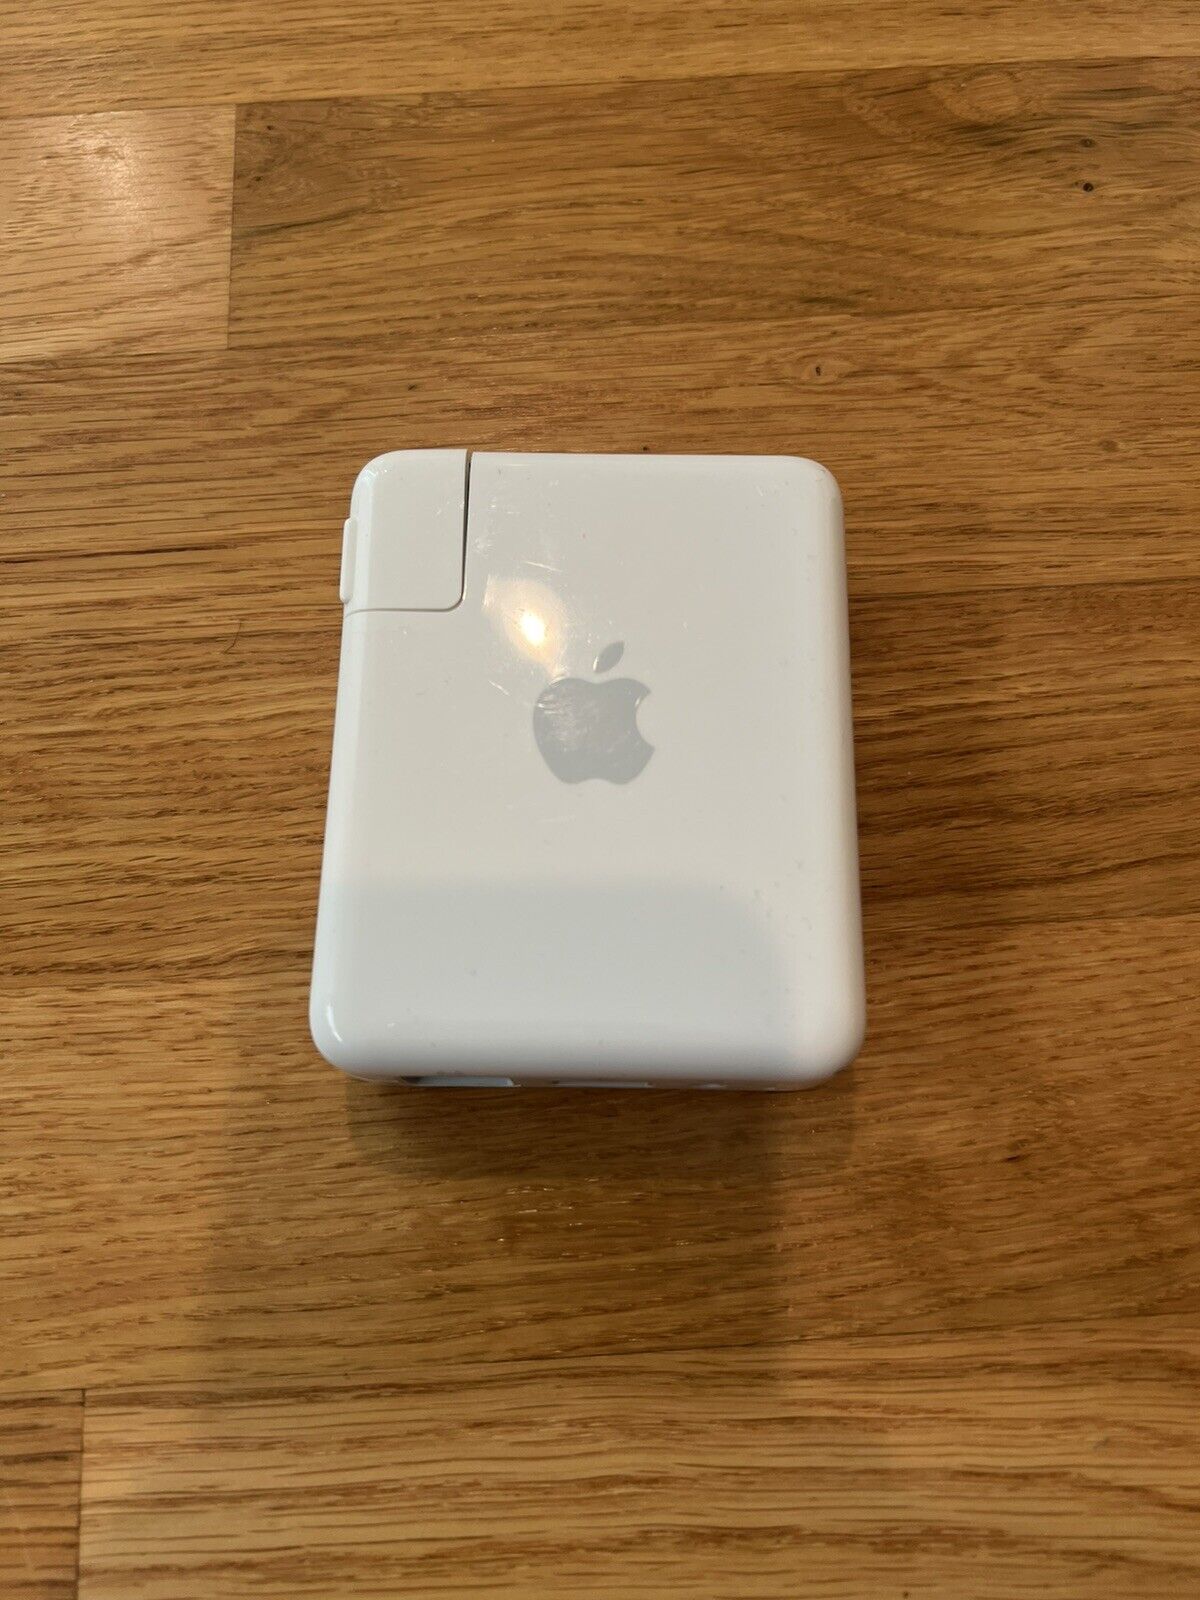 Apple AirPort Express Base Station